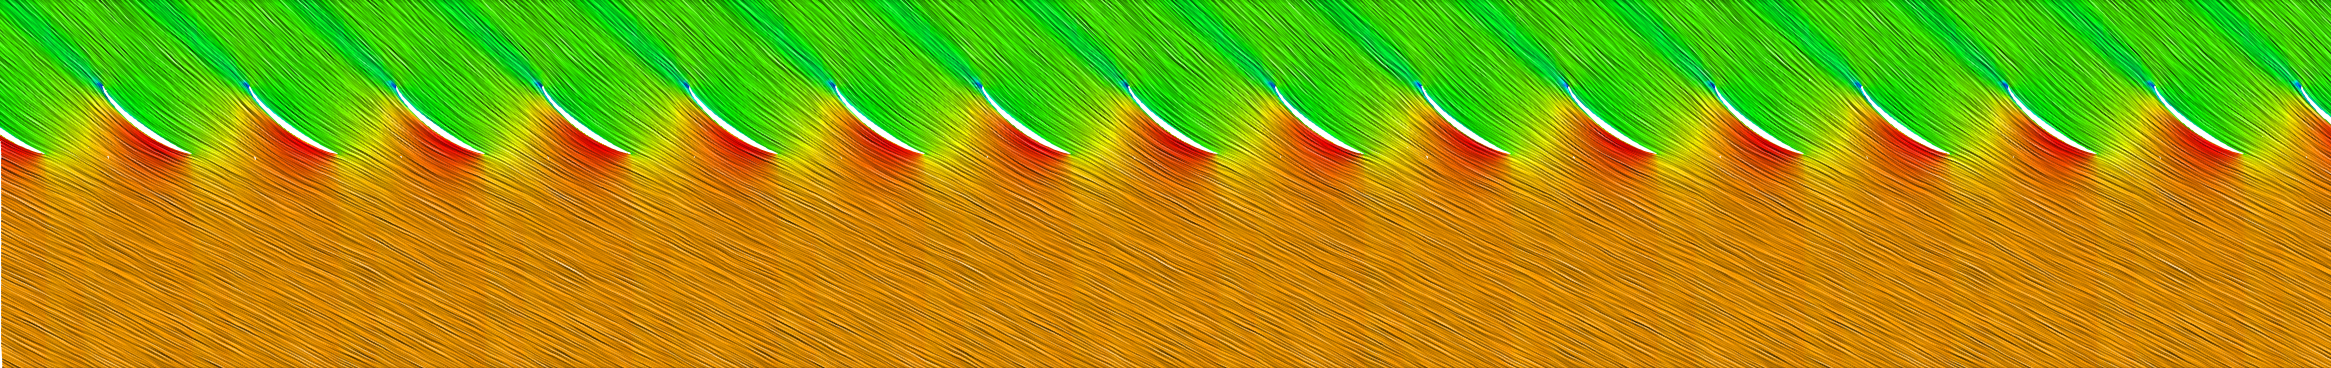 Axial Fan CFD Relative Velocity Blade to Blade View